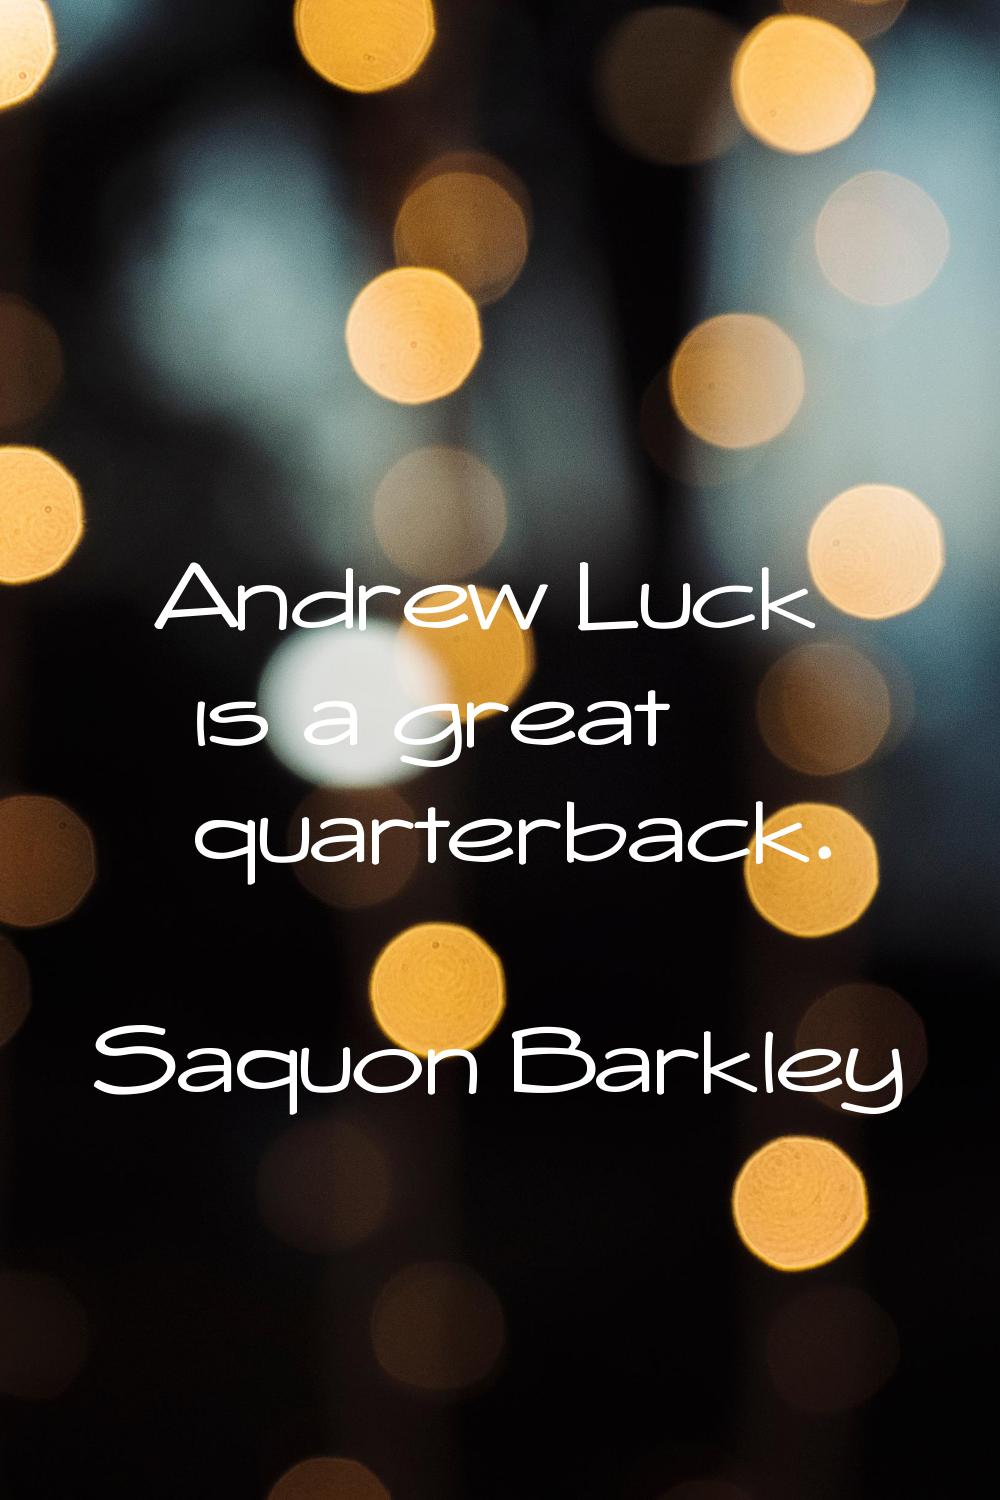 Andrew Luck is a great quarterback.